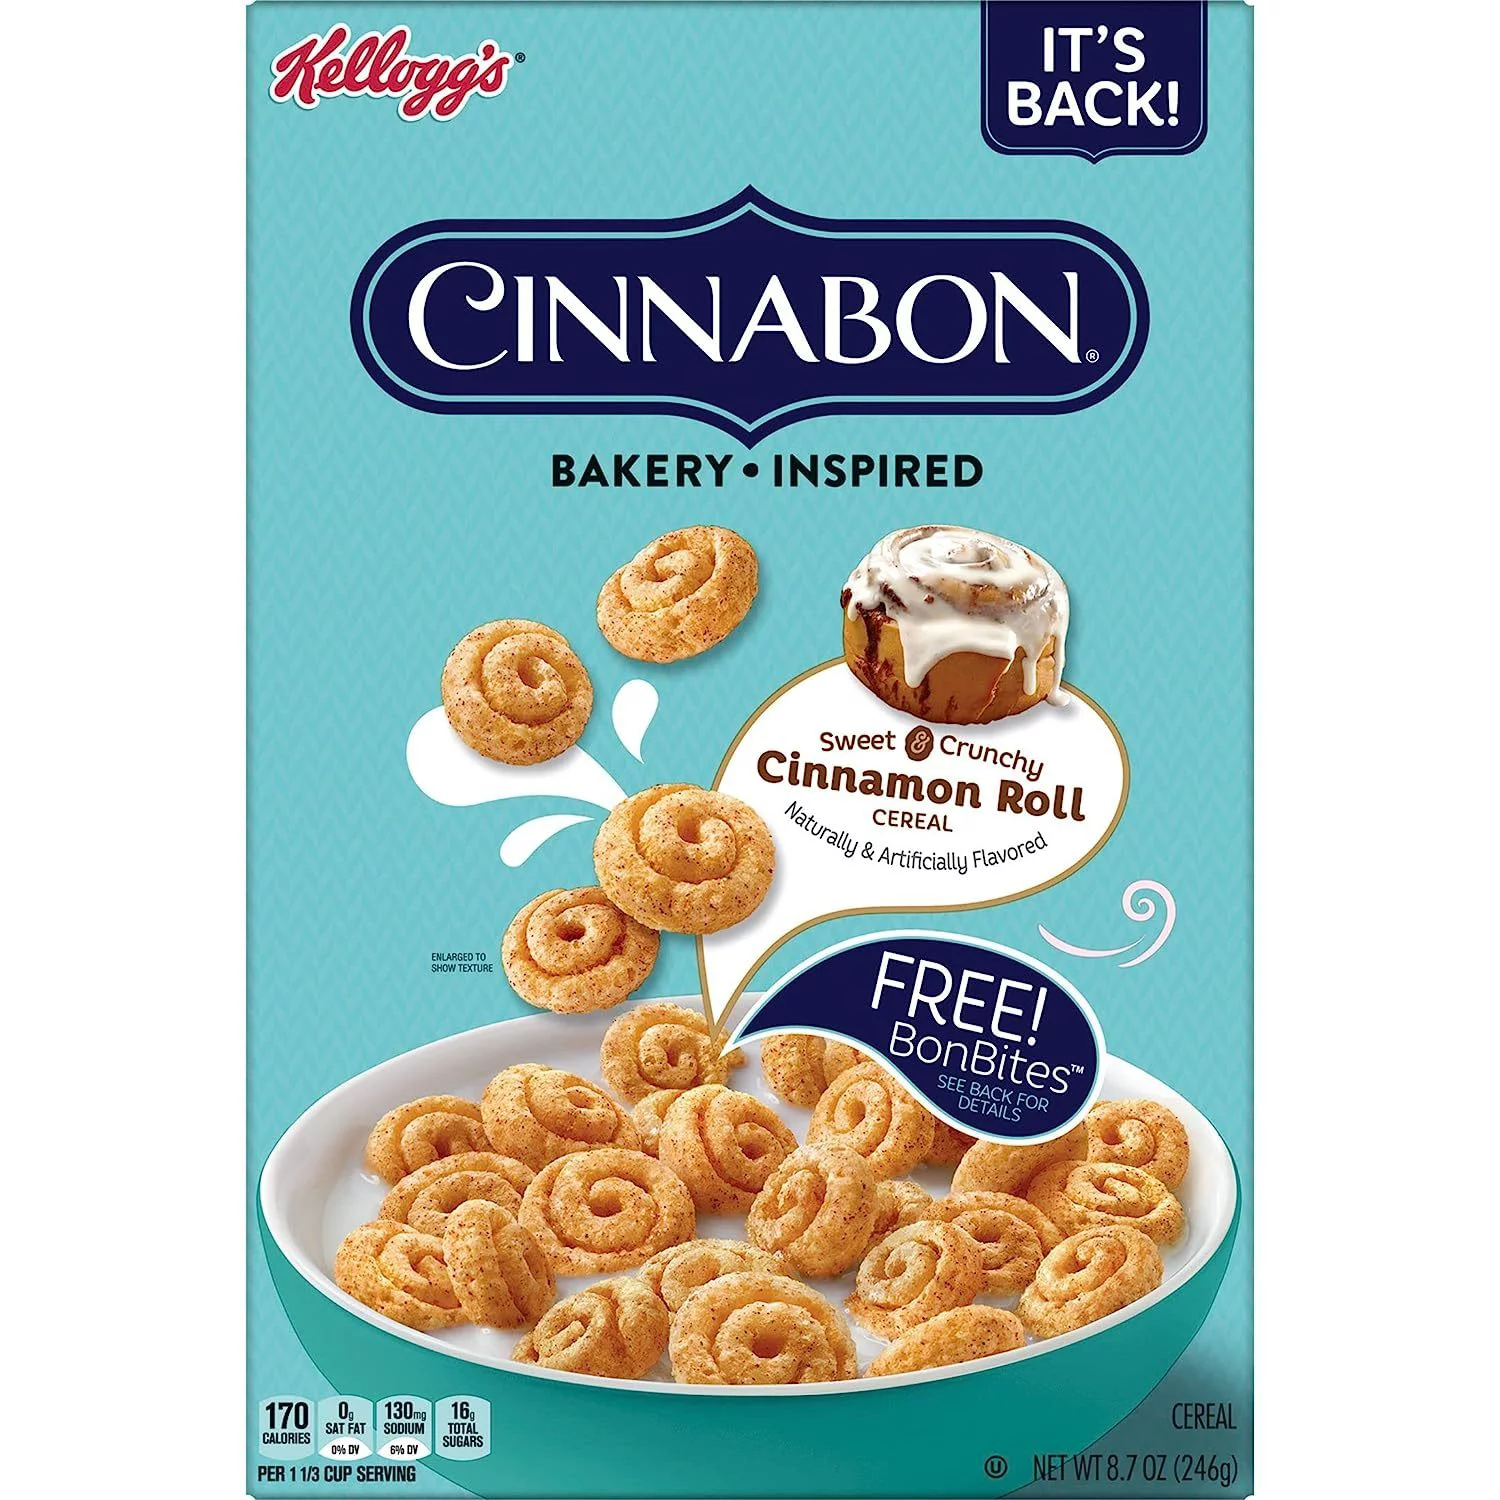 Treat yourself to the delicious taste of freshly baked Cinnabon cinnamon rolls in every bite. 